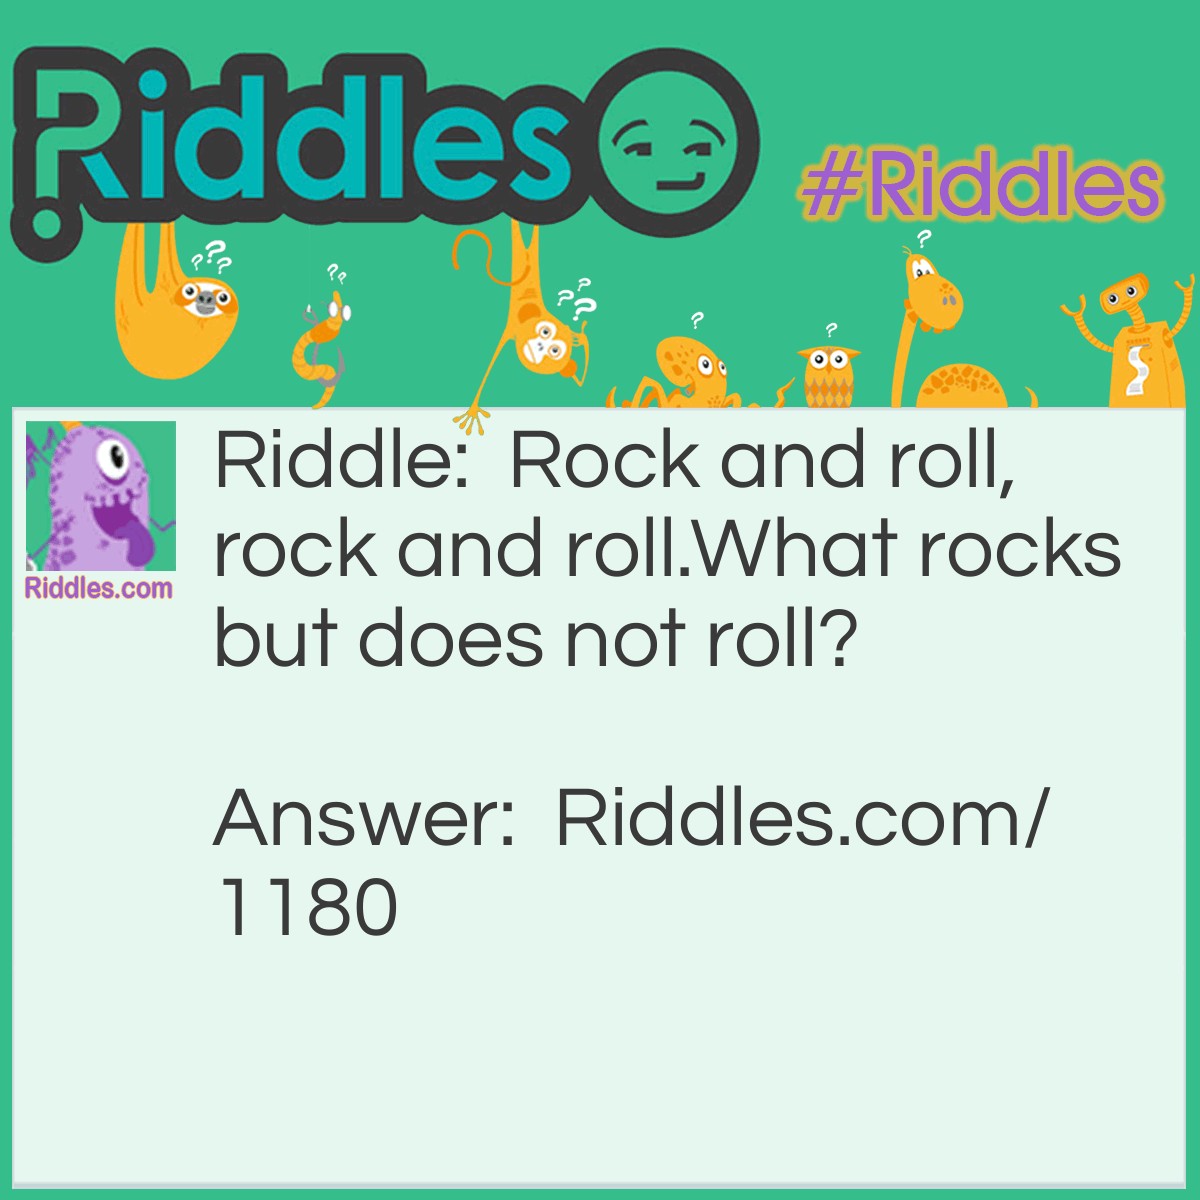 Riddle: Rock and roll, rock and roll.
What rocks but does not roll? Answer: A Rocking chair